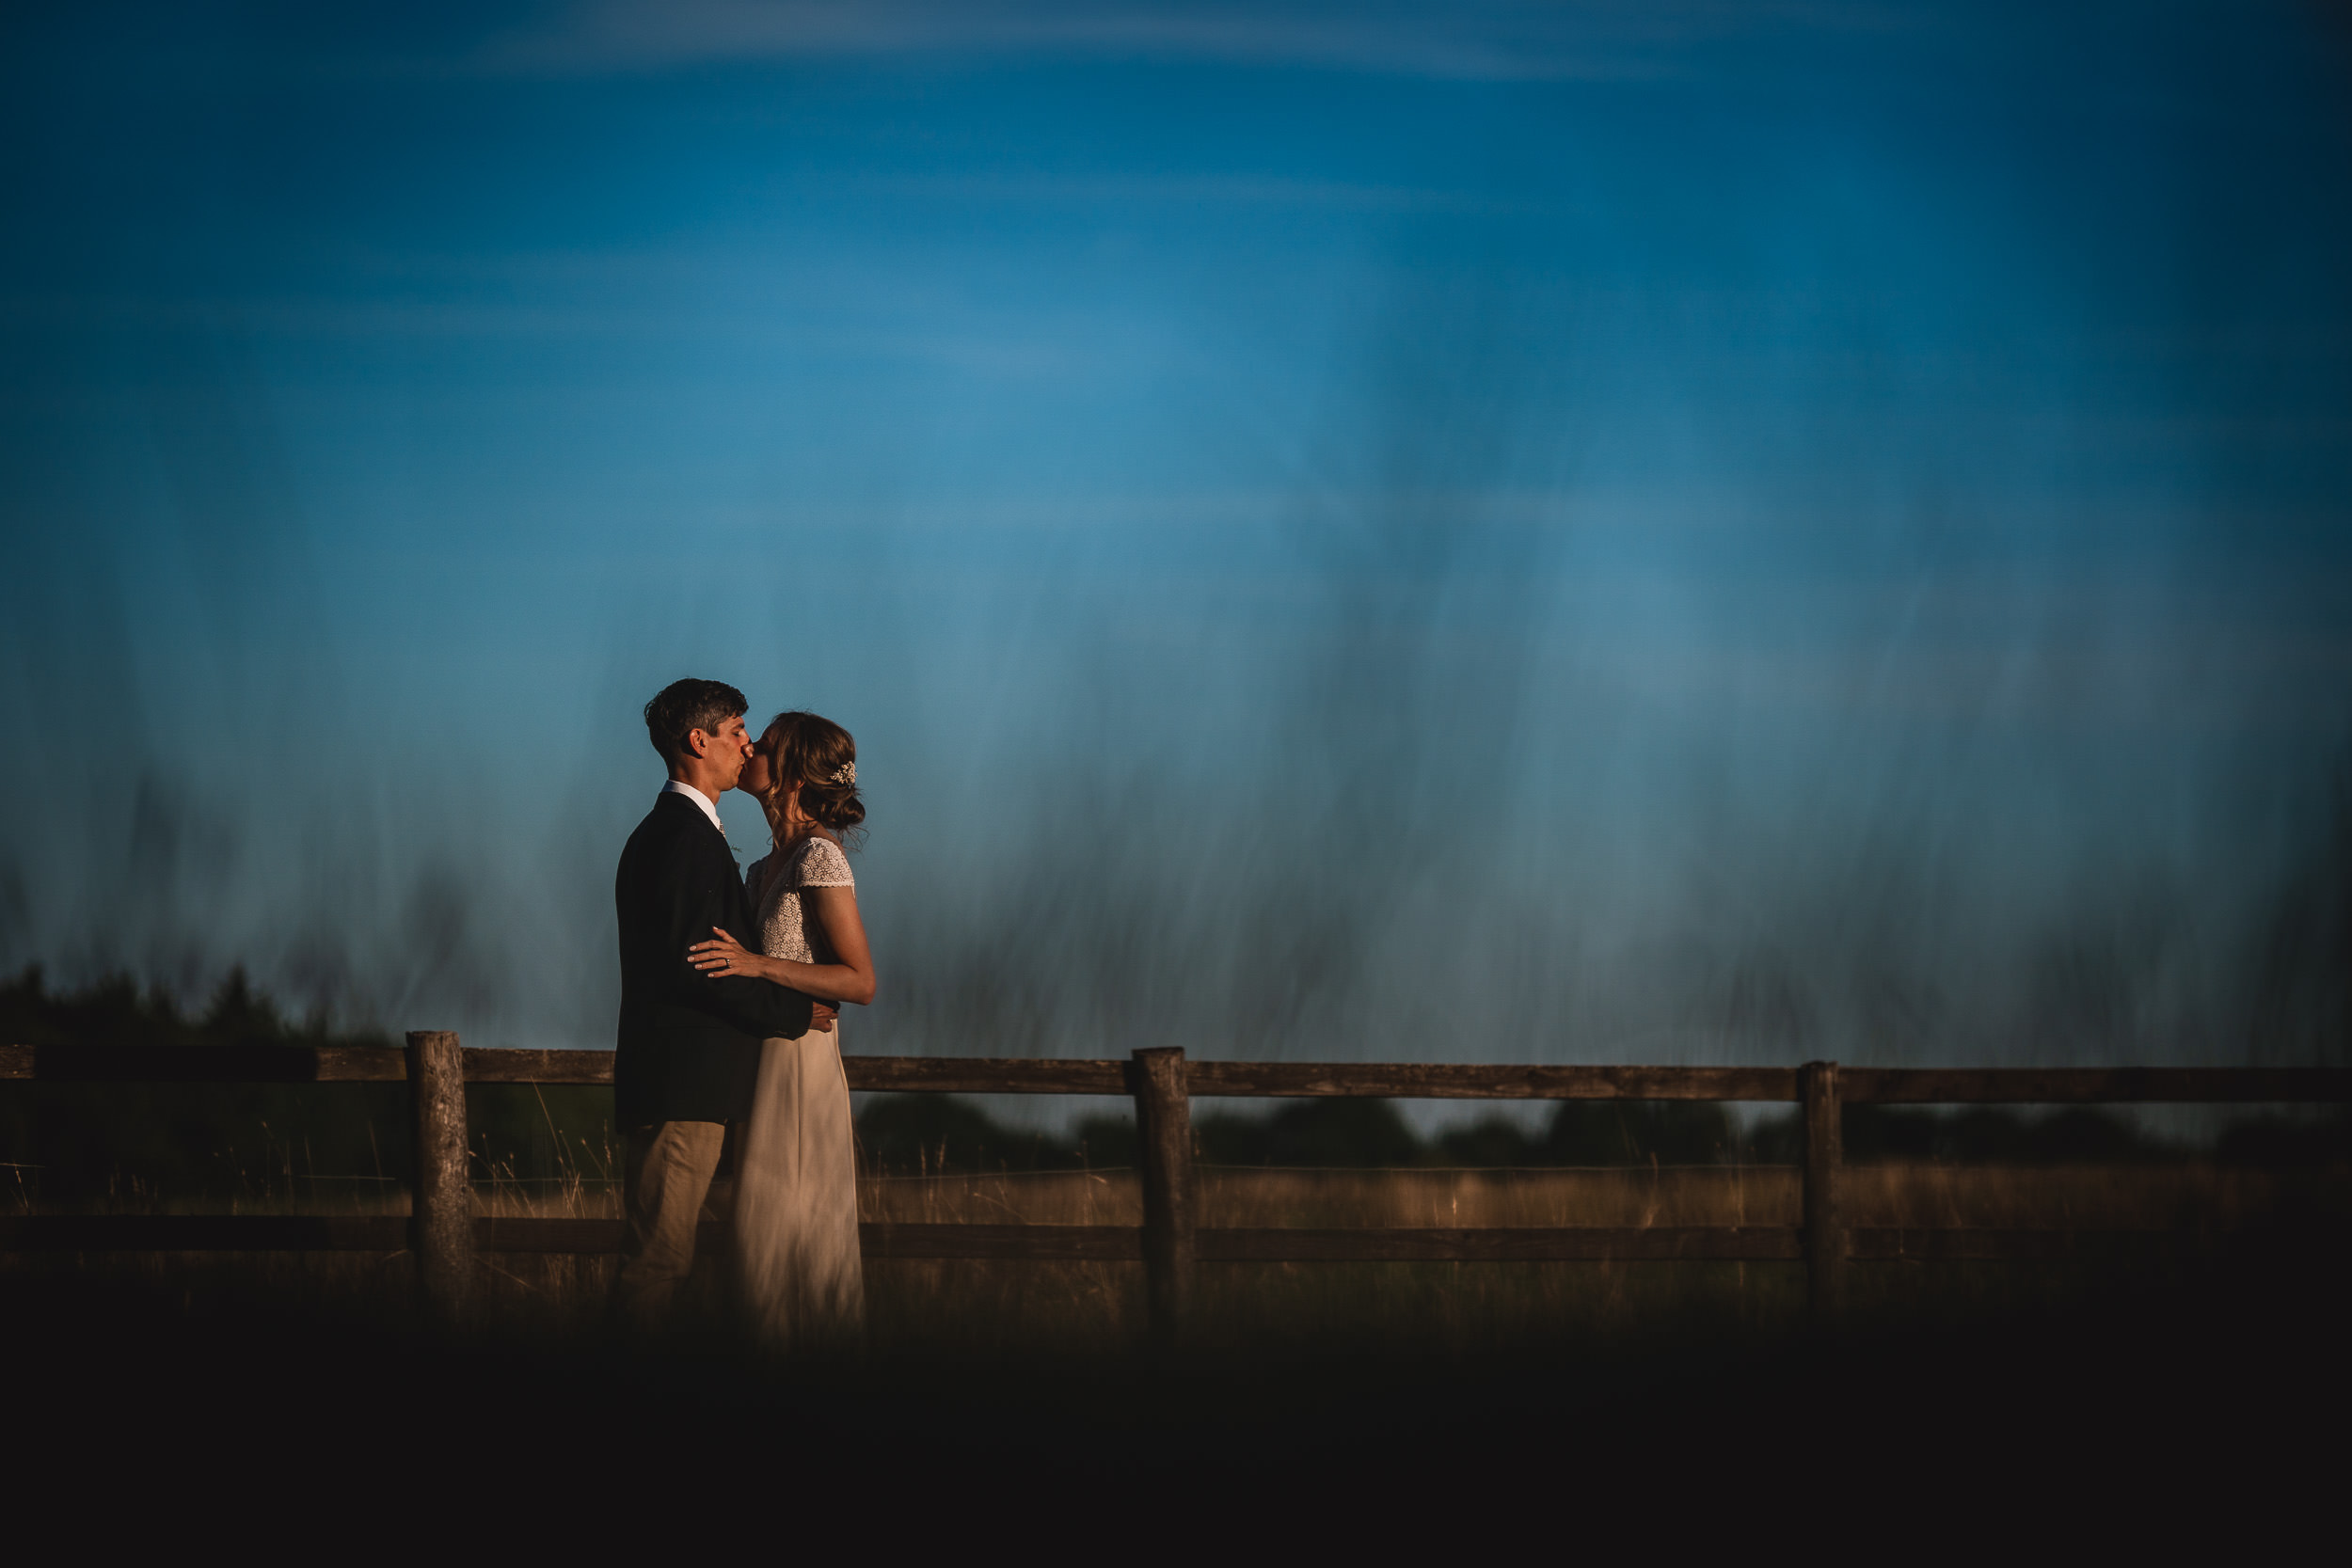 A bride and groom posing cheerfully for their wedding photographer in front of a fence at dusk.